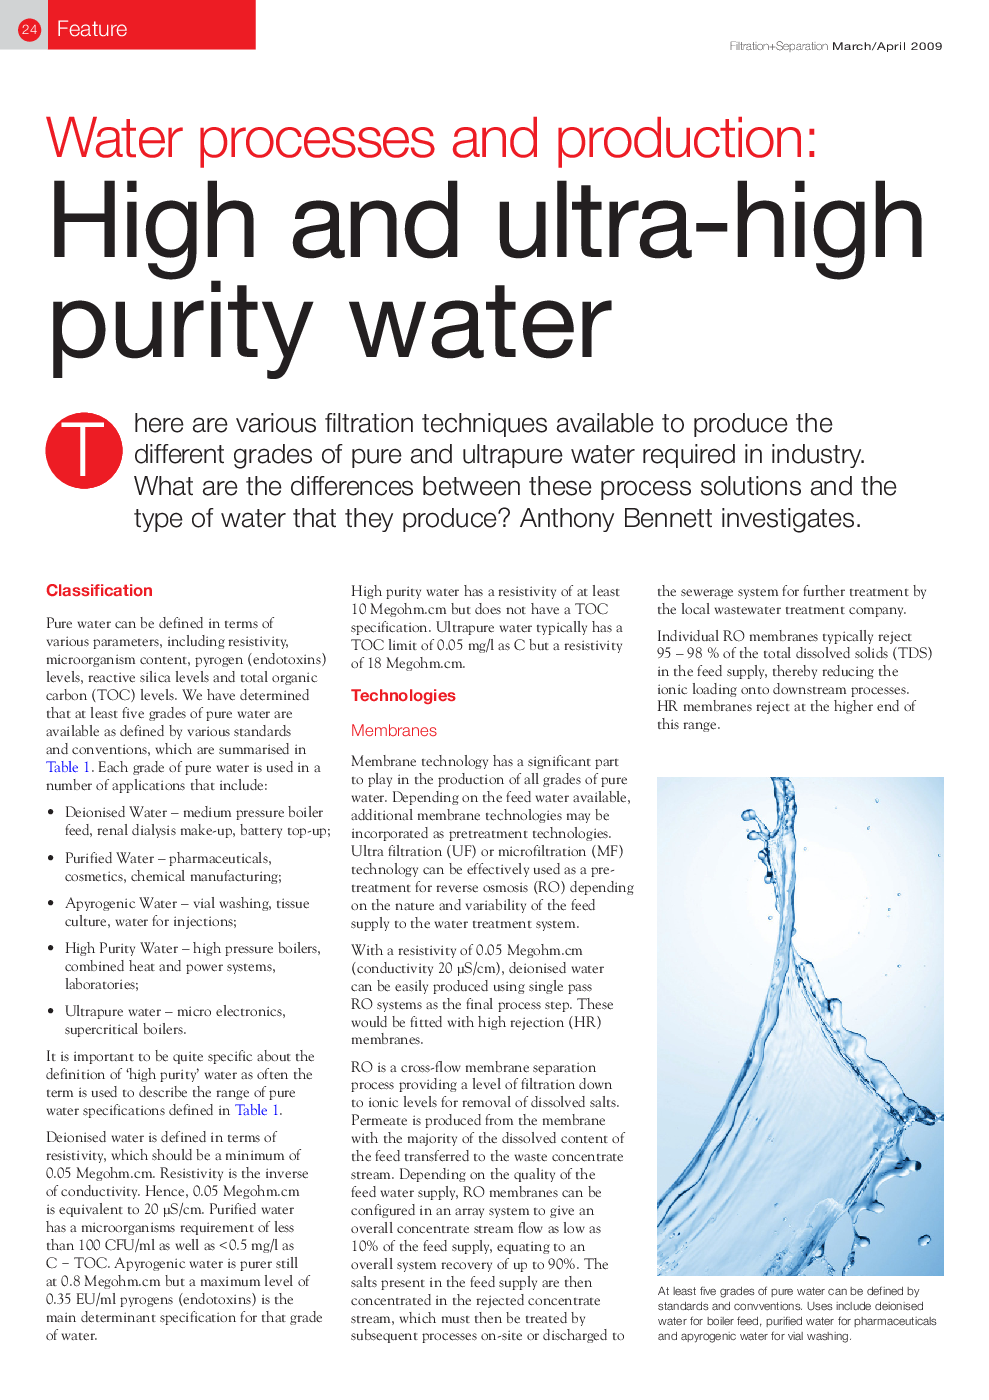 Water processes and production: High and ultra-high purity water